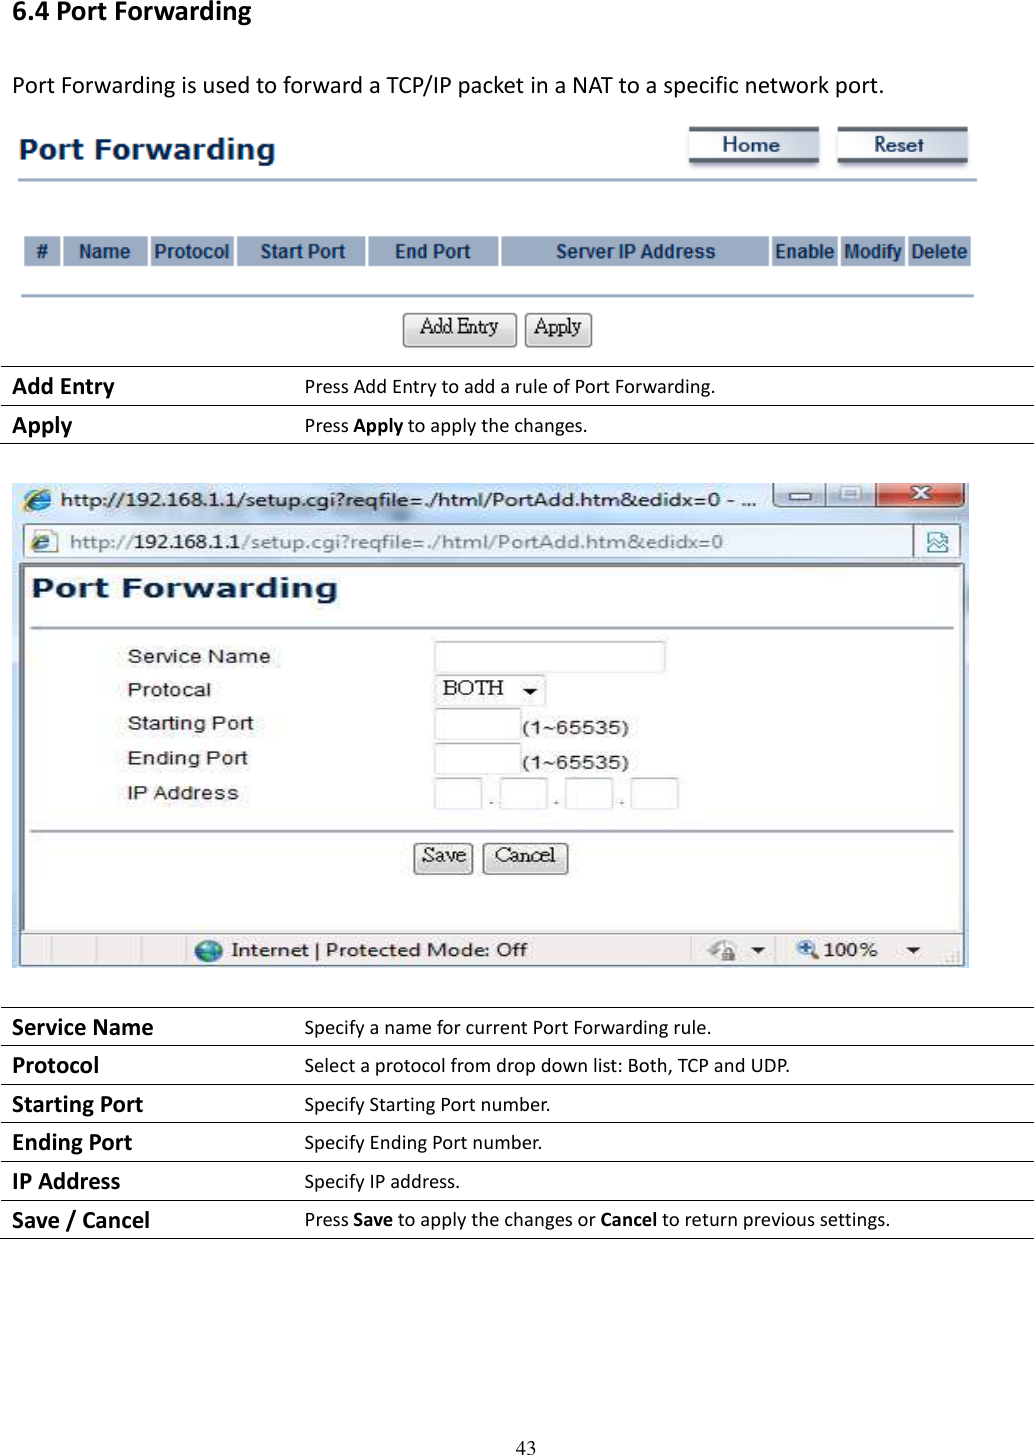   43 6.4 Port Forwarding Port Forwarding is used to forward a TCP/IP packet in a NAT to a specific network port.  Add Entry Press Add Entry to add a rule of Port Forwarding. Apply Press Apply to apply the changes.    Service Name Specify a name for current Port Forwarding rule. Protocol Select a protocol from drop down list: Both, TCP and UDP. Starting Port Specify Starting Port number. Ending Port Specify Ending Port number. IP Address Specify IP address. Save / Cancel Press Save to apply the changes or Cancel to return previous settings.      